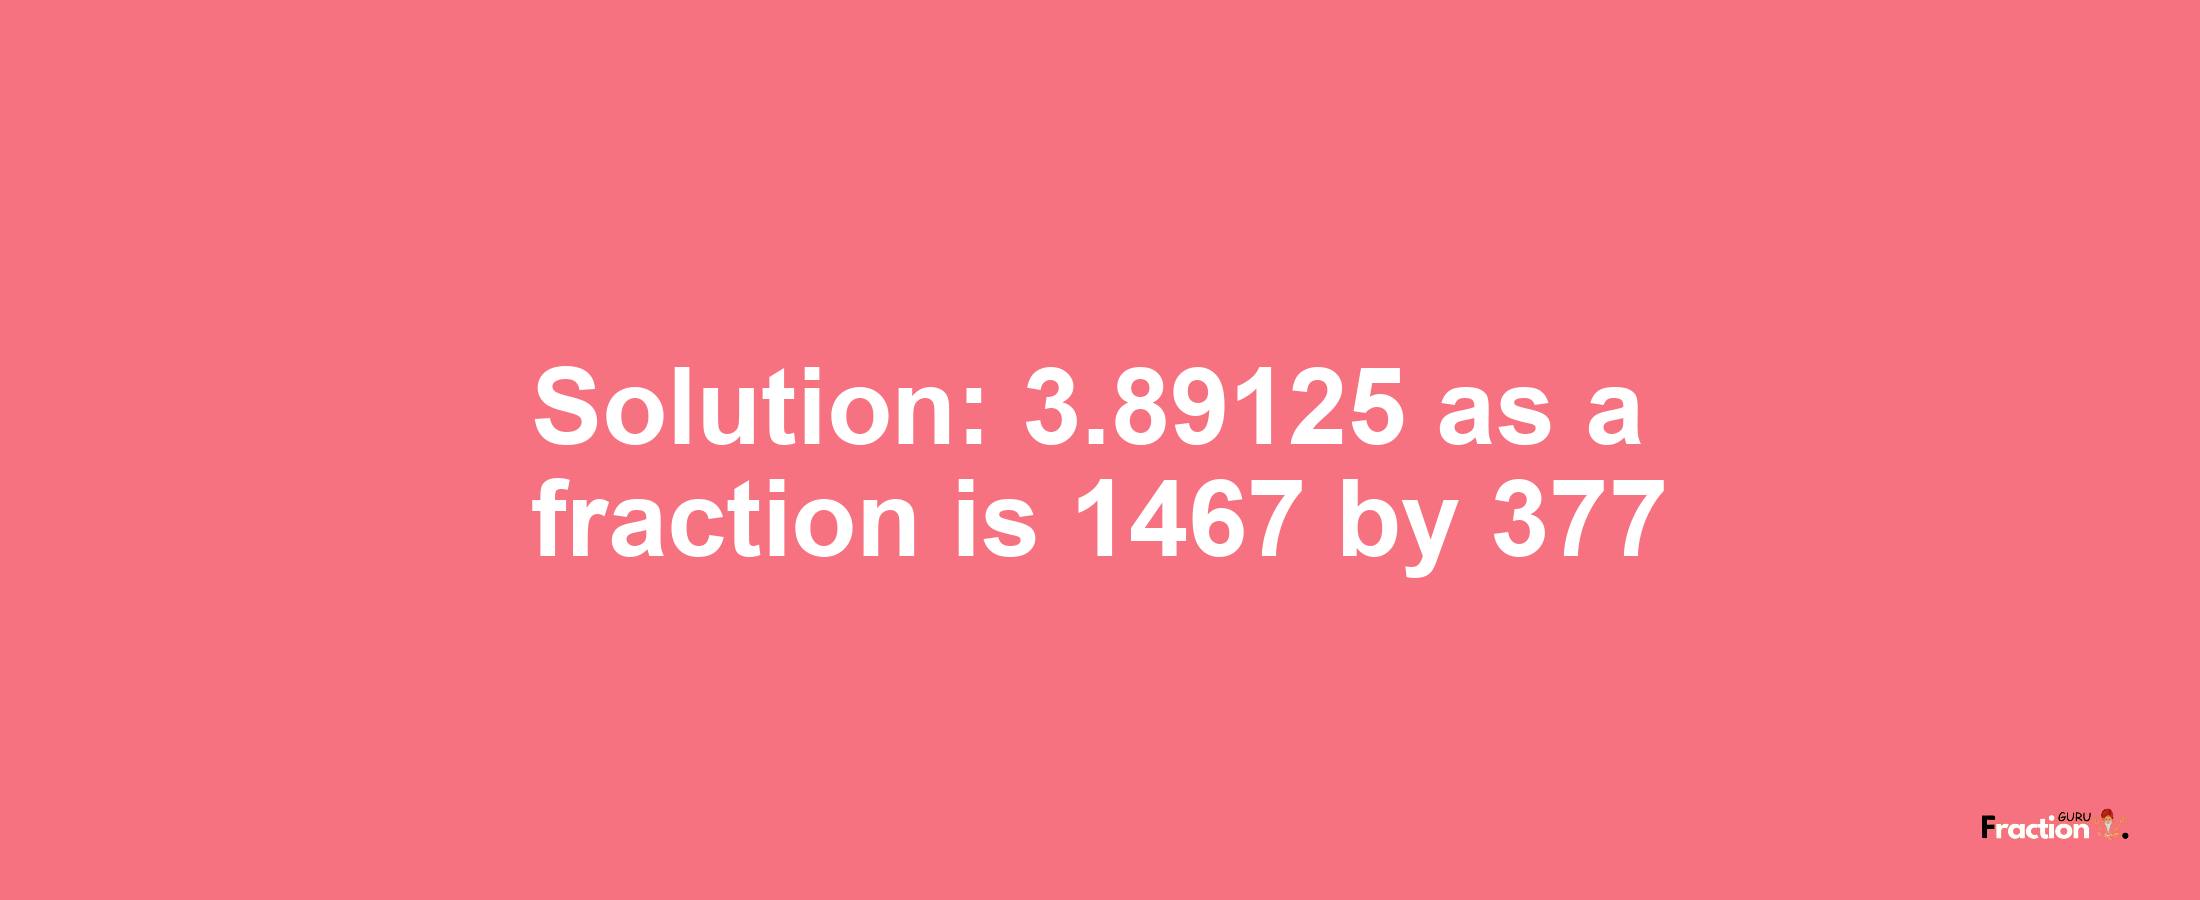 Solution:3.89125 as a fraction is 1467/377